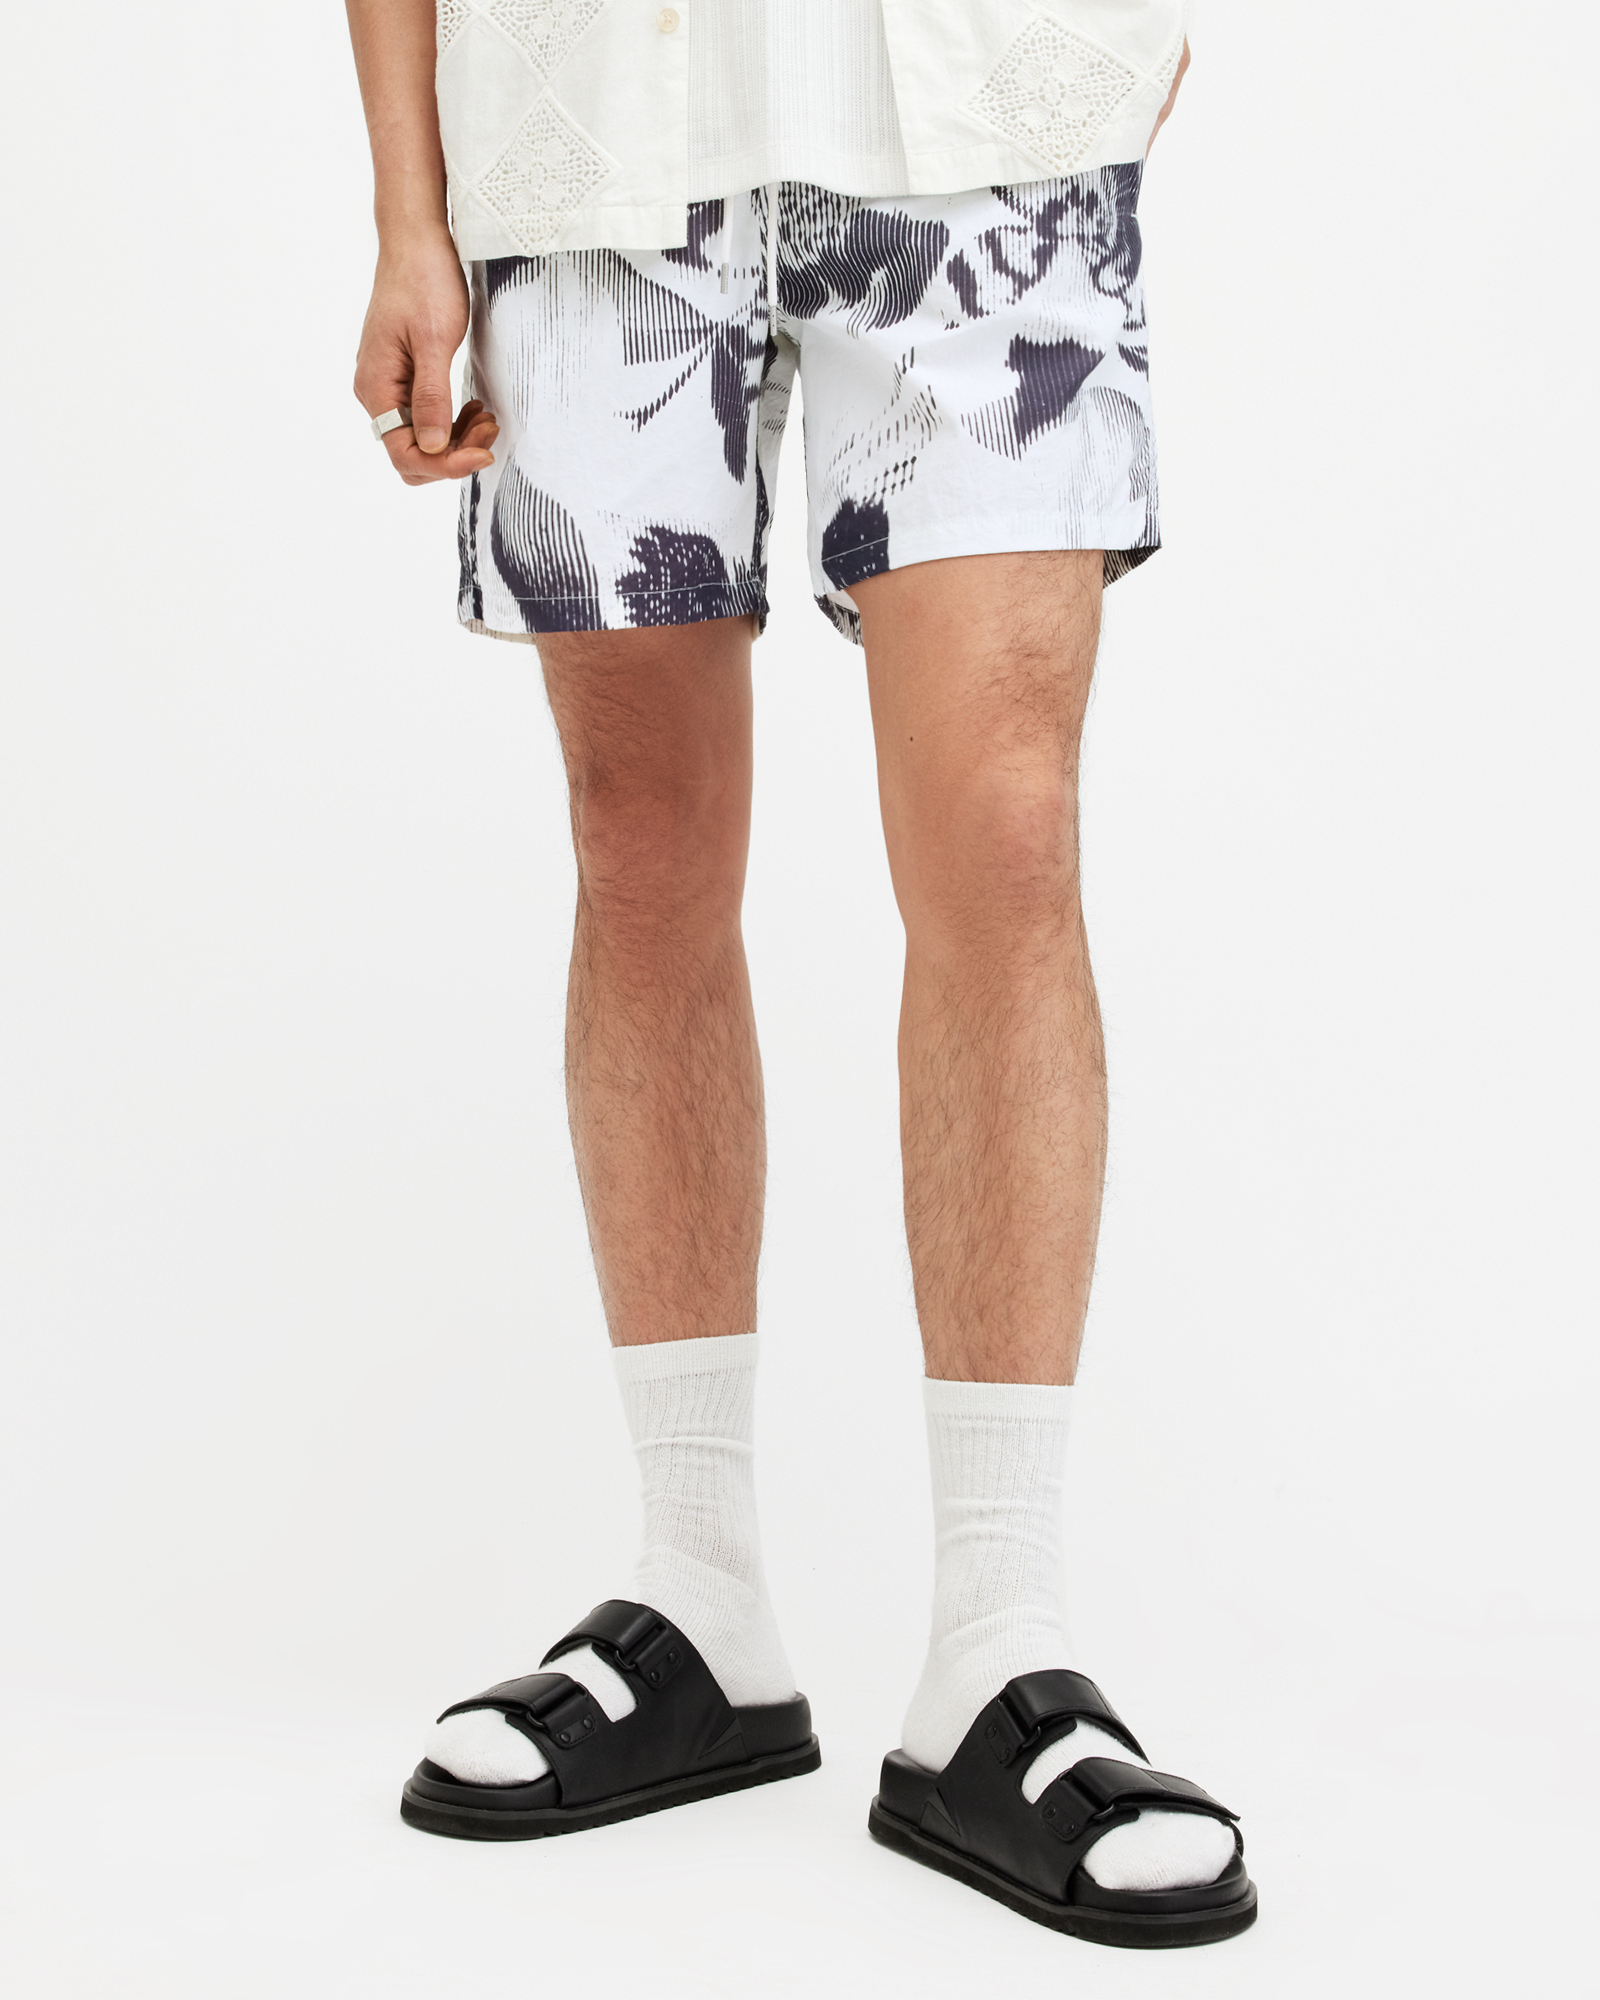 AllSaints Frequency Slim Fit Swim Shorts,, Off White